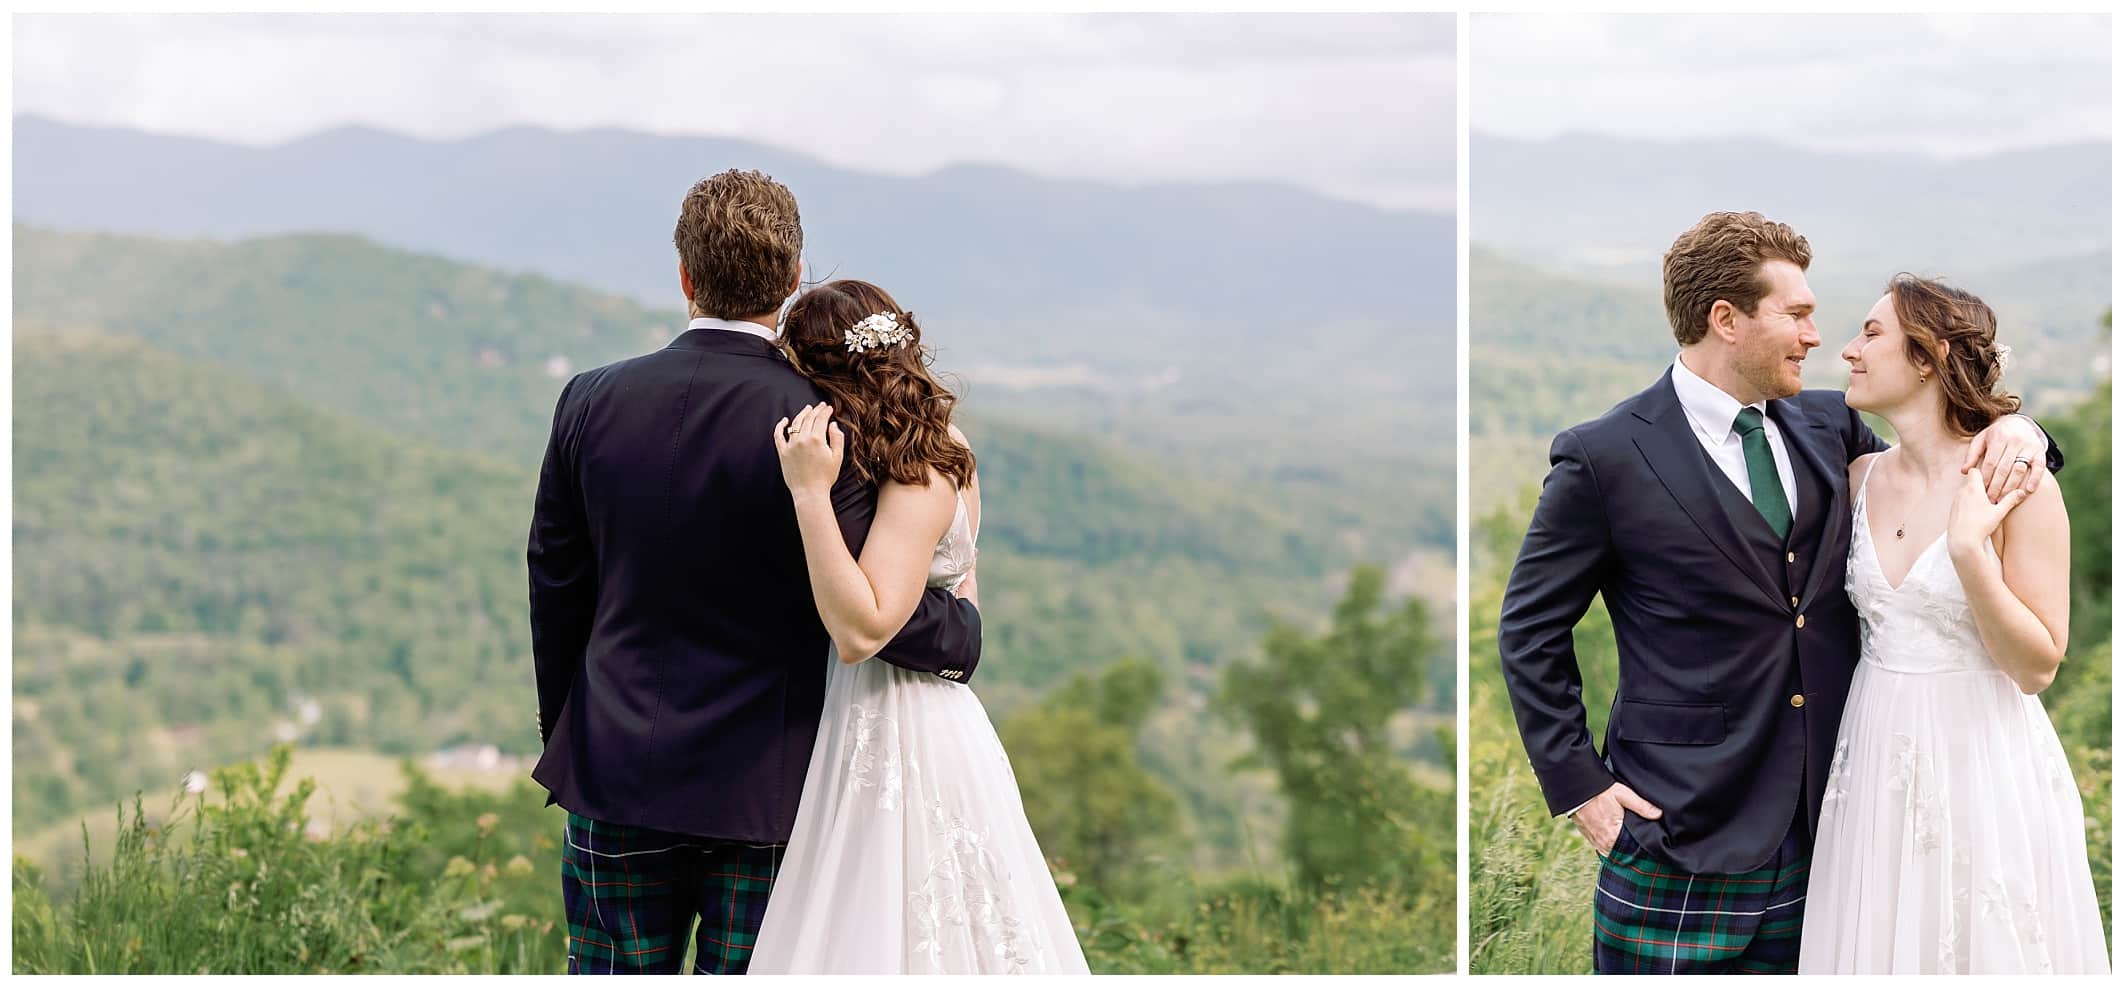 Asheville wedding photographer captures bride and groom portraits in Blue Ridge mountains